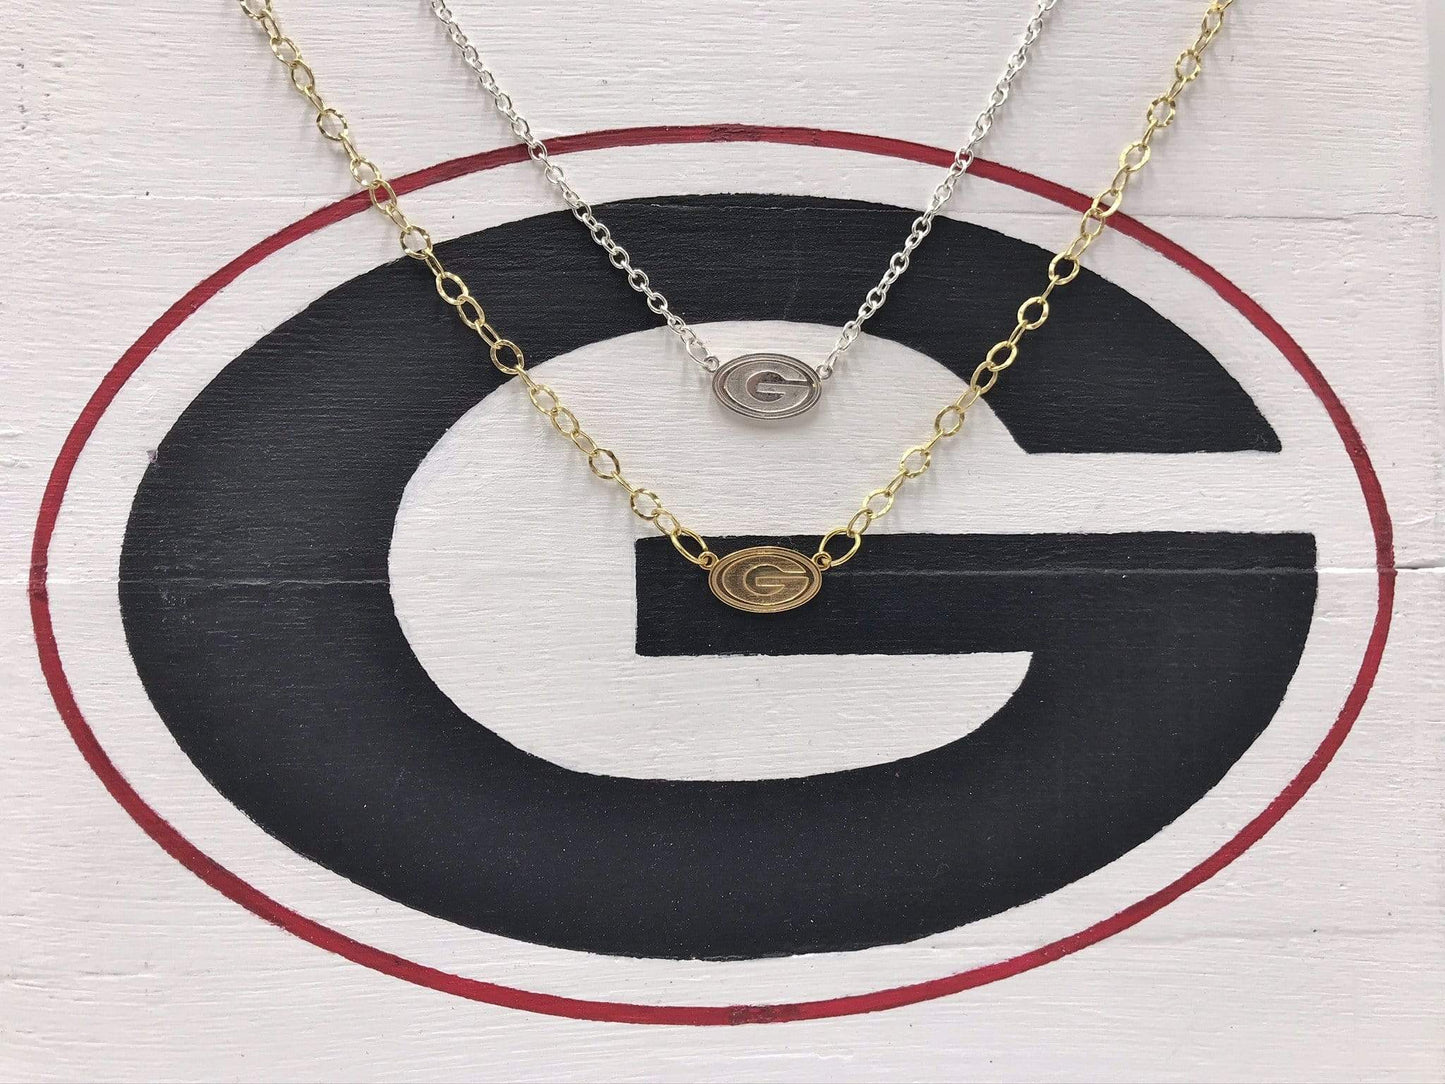 Rye Garnets Necklace,  Georgia Bulldogs Necklace, Green Bay Packers Necklace, Grambling State University Tigers Necklace, Greenwood Eagles Necklace